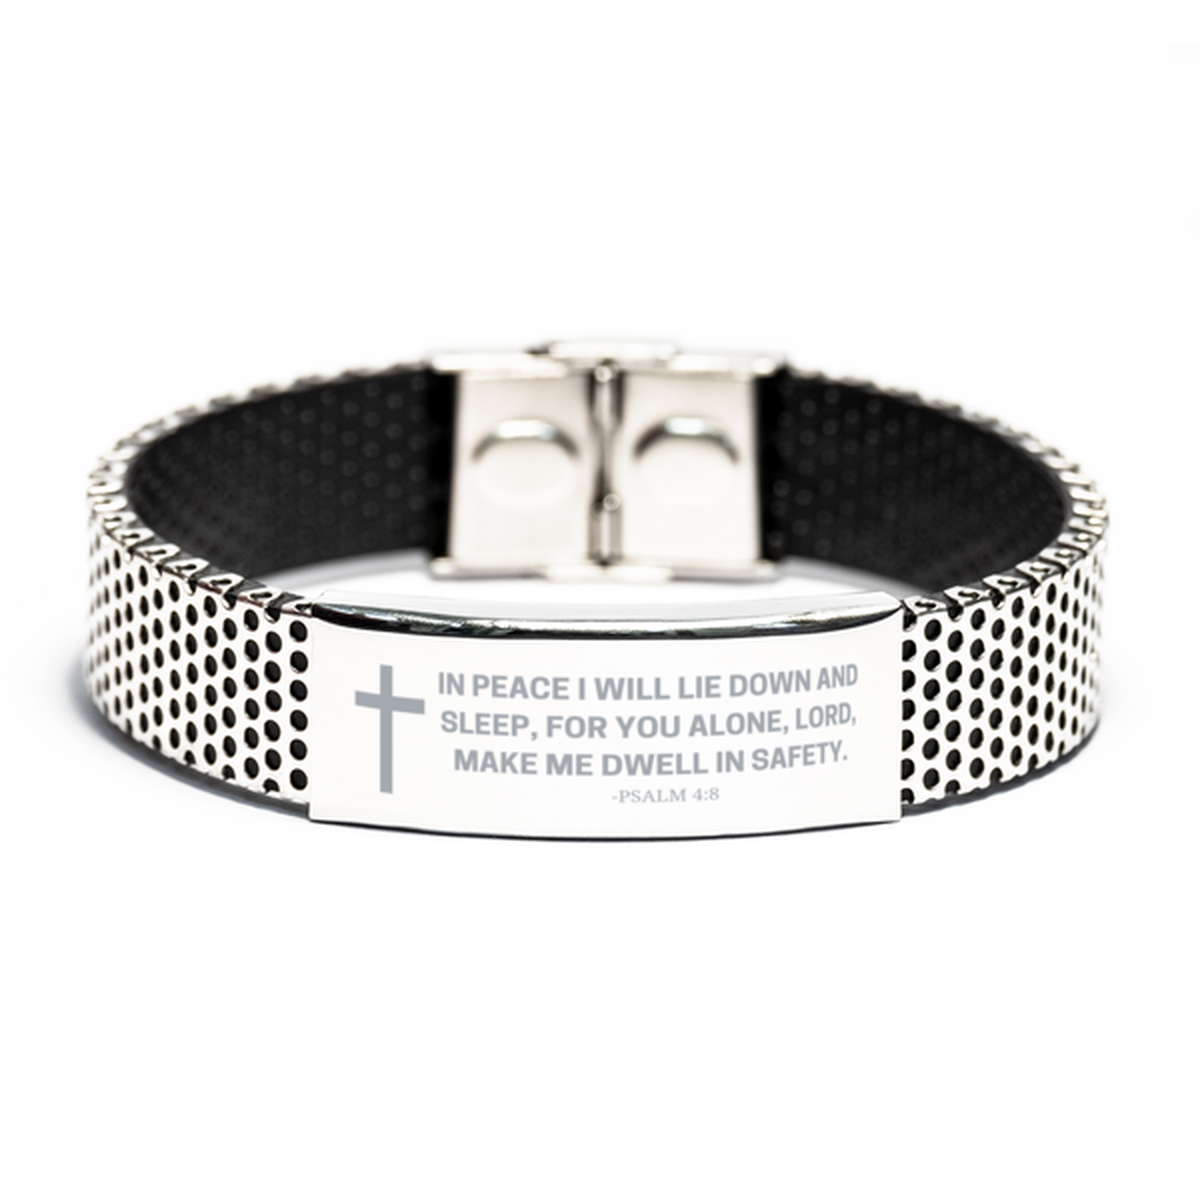 Baptism Gifts For Teenage Boys Girls, Christian Bible Verse Stainless Steel Bracelet, In peace I will lie down and sleep, Catholic Confirmation Gifts for Son, Godson, Grandson, Nephew